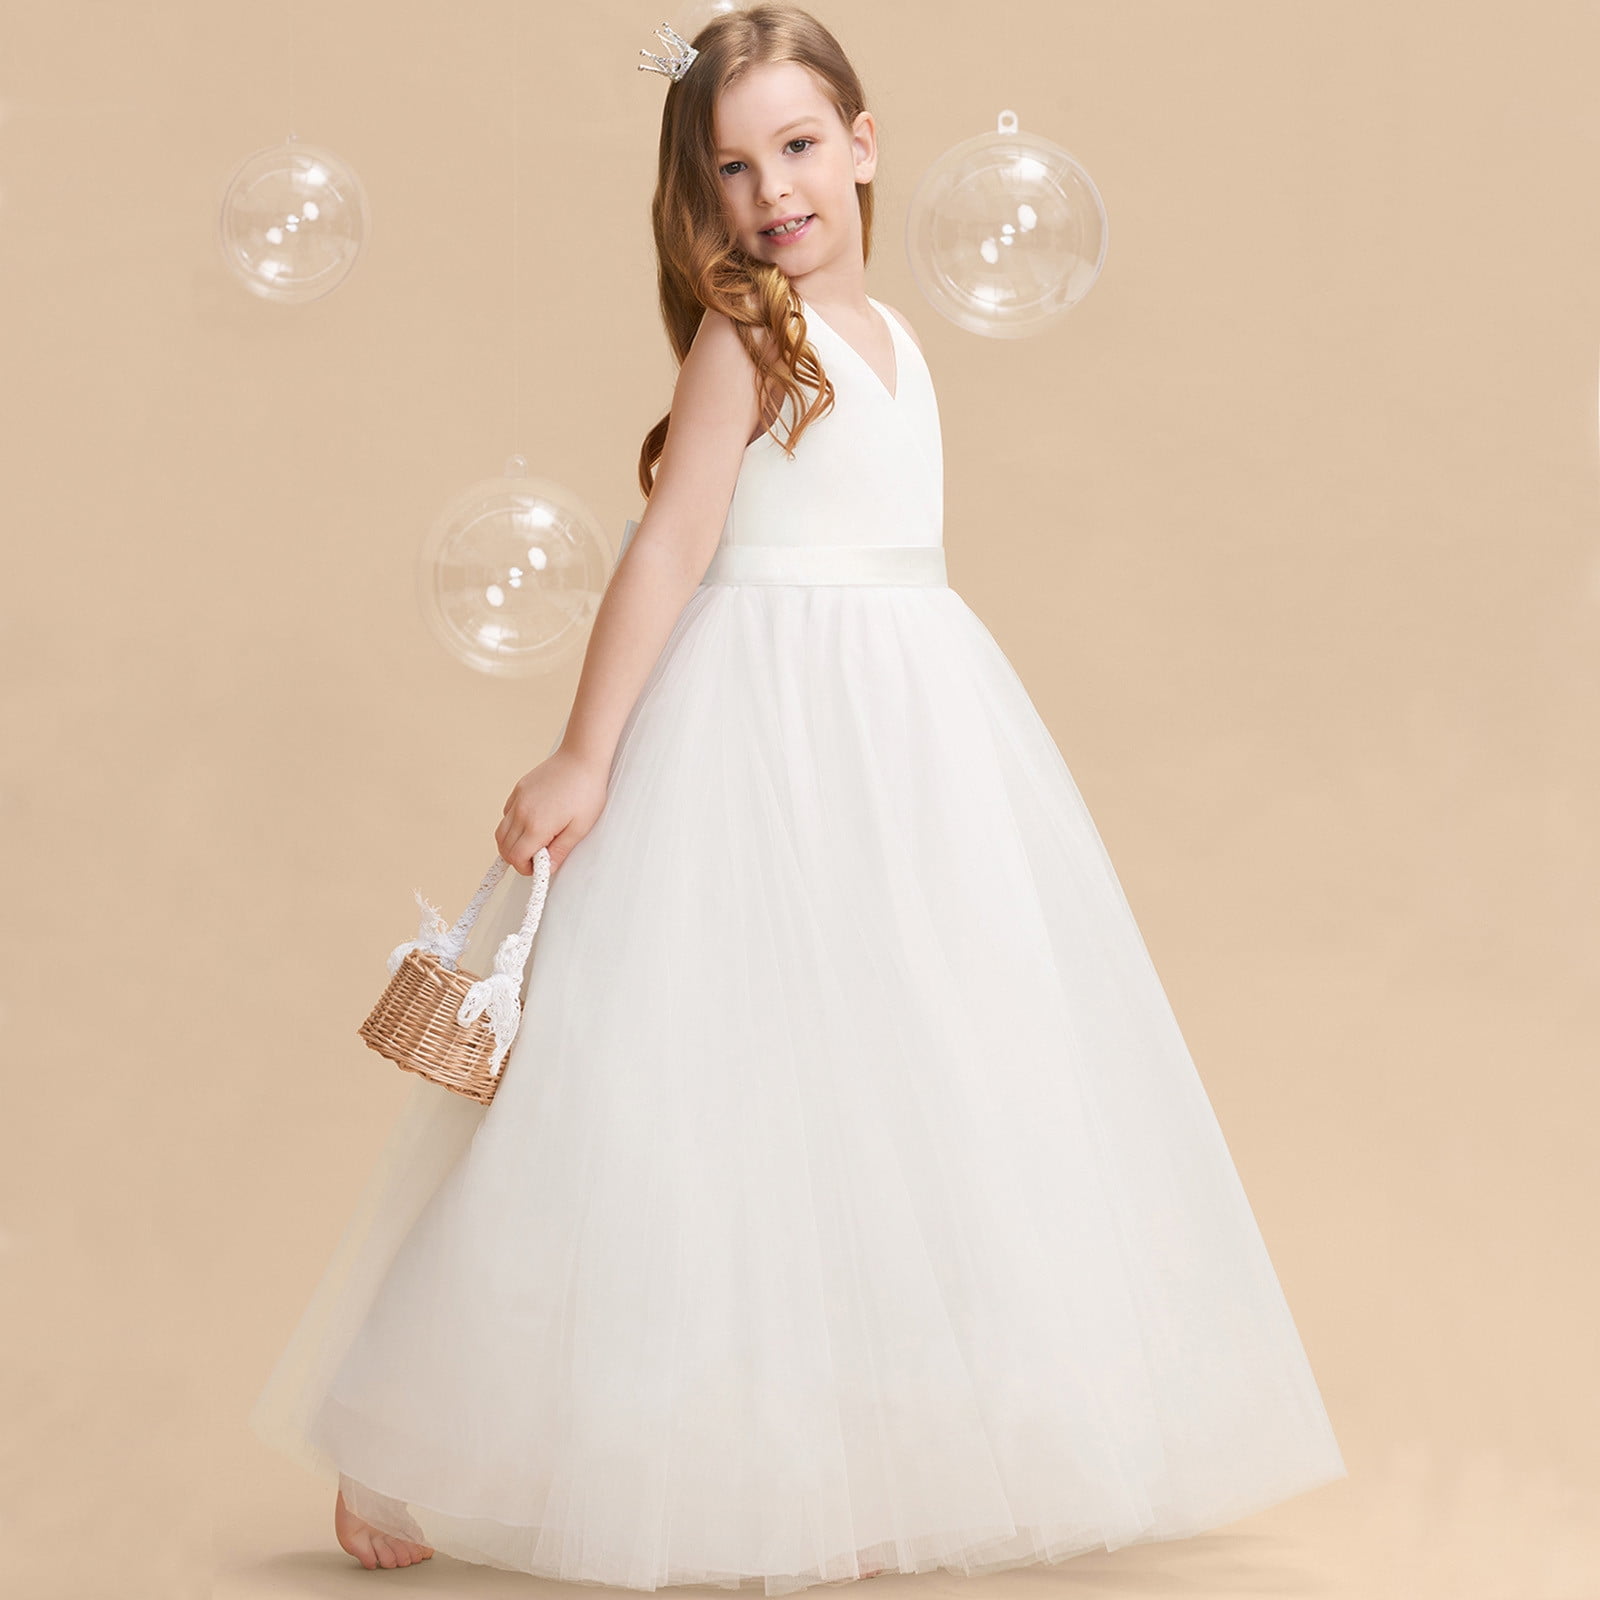 Best Teen Prom Dresses, Prom Dresses for 13 Year Olds Online